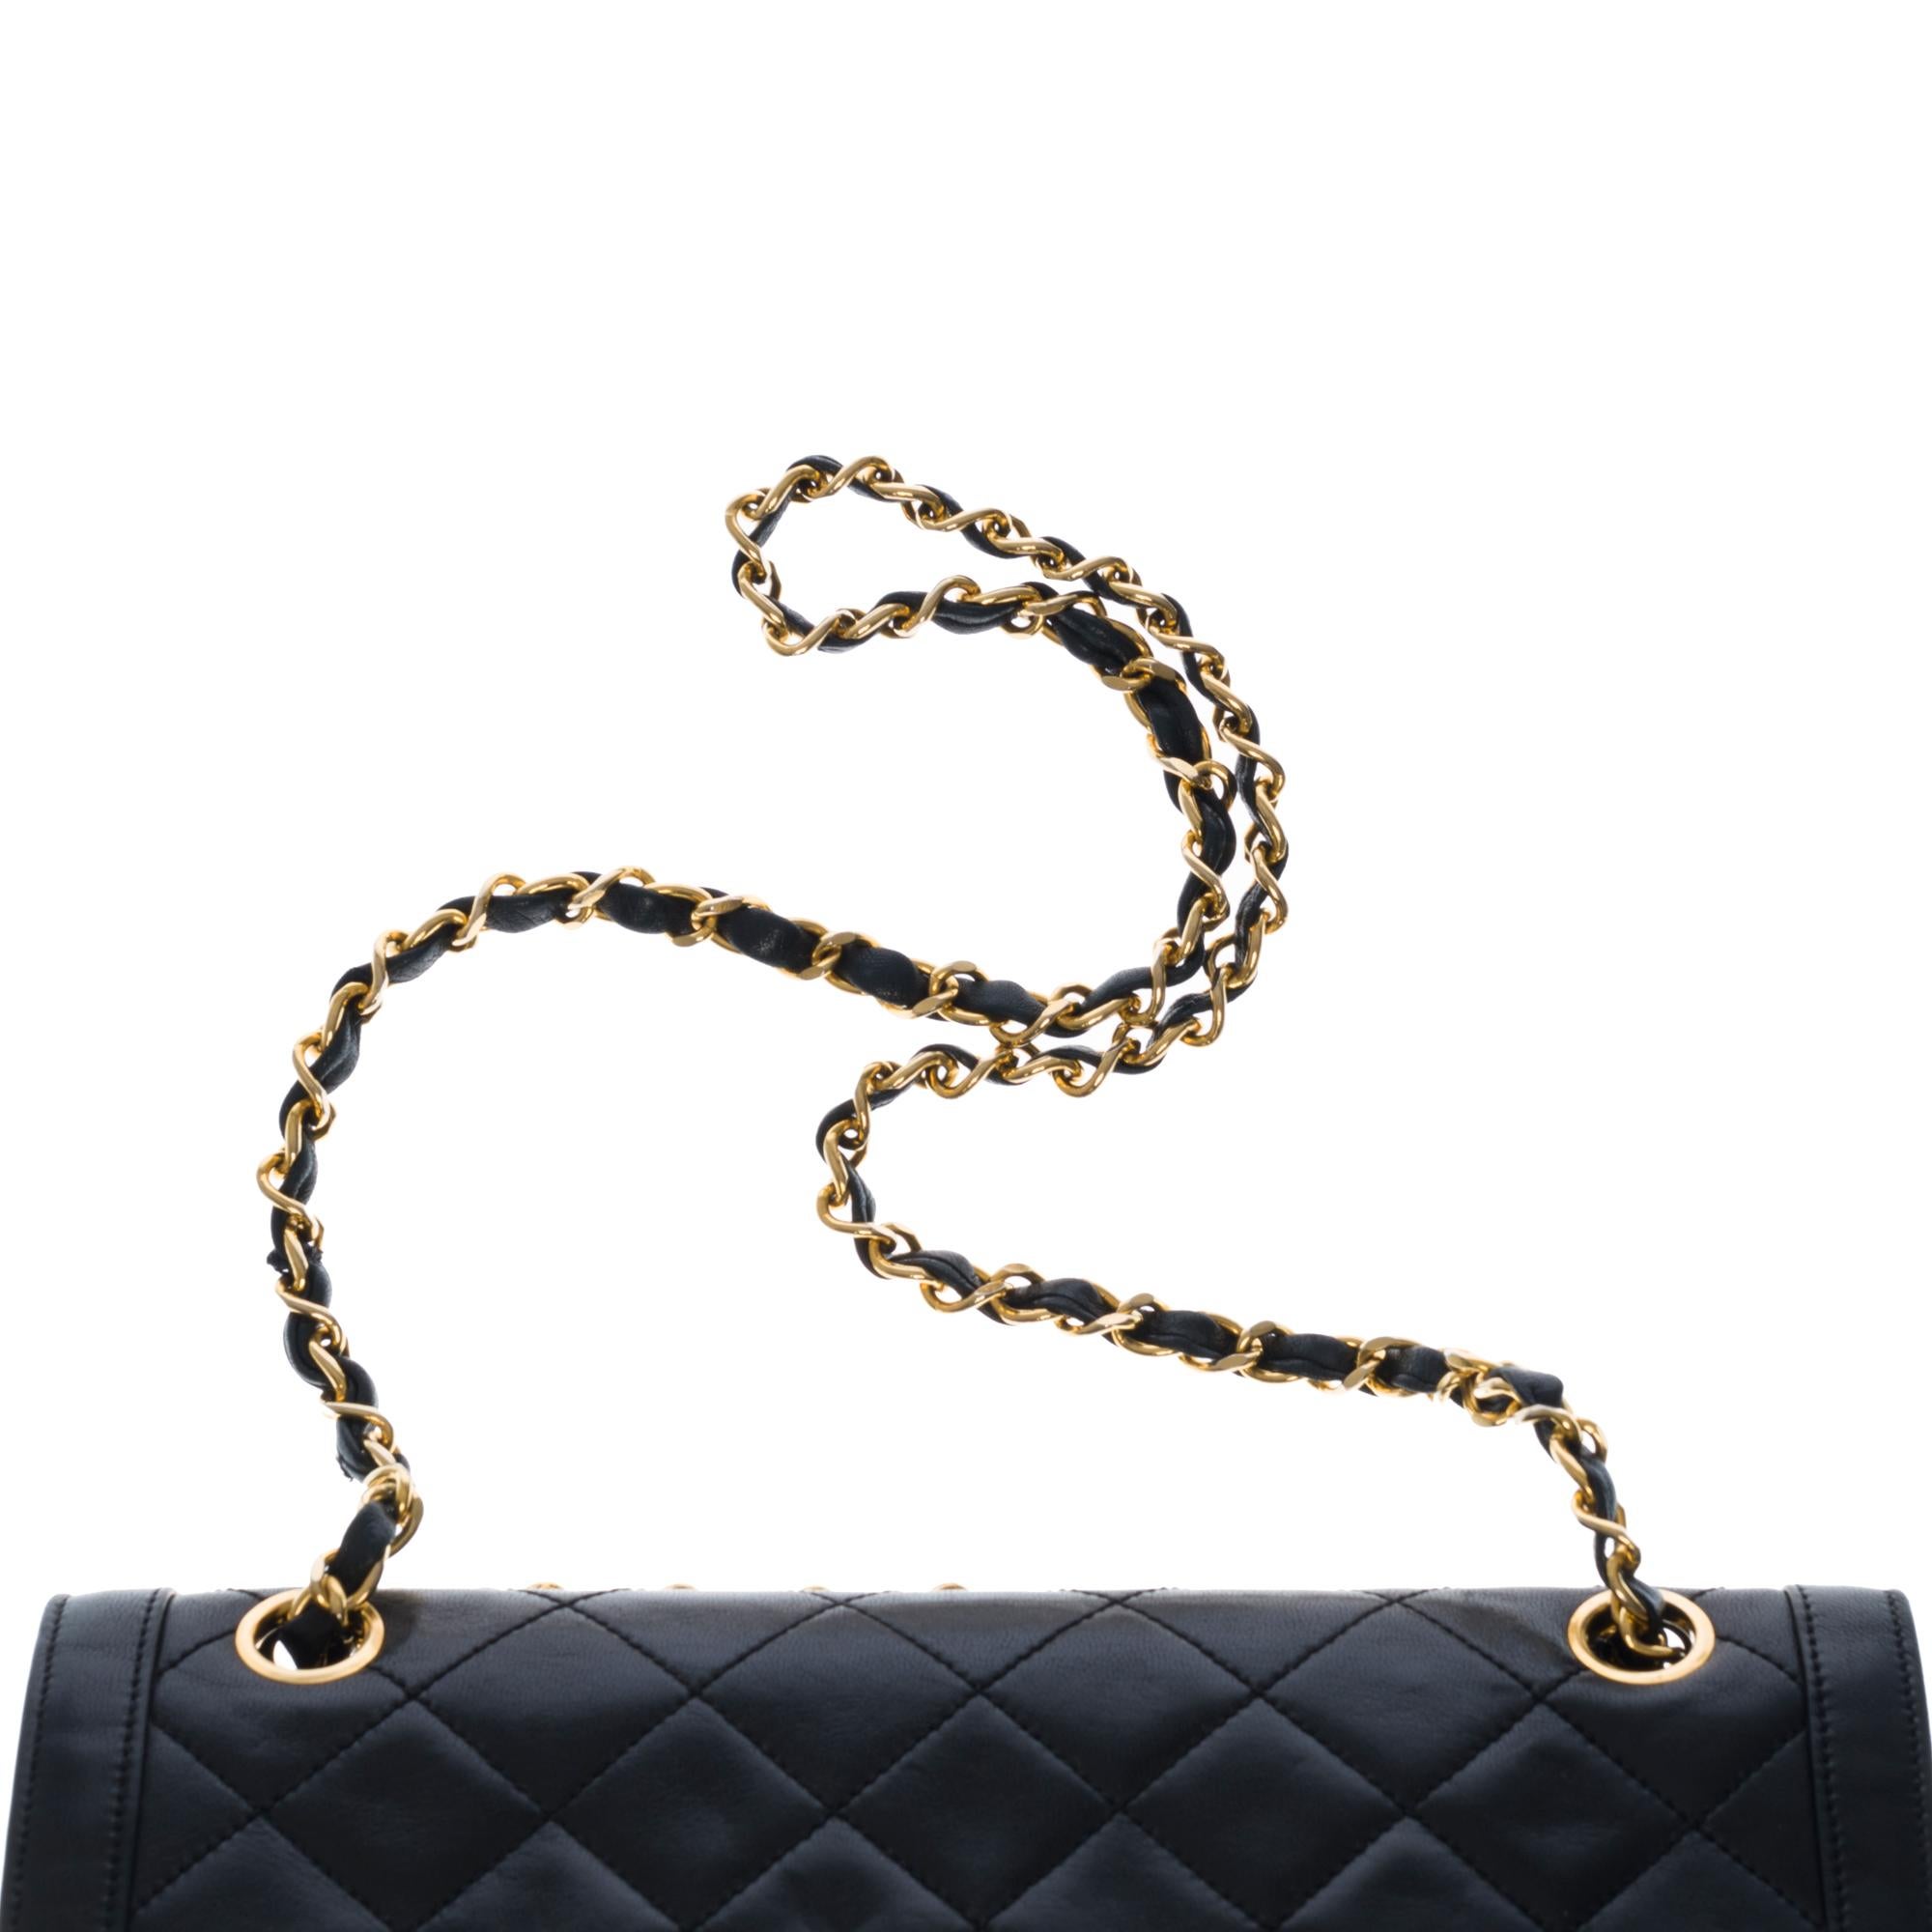 Rare Chanel Classic Double Flap shoulder bag in black quilted leather and GHW 2